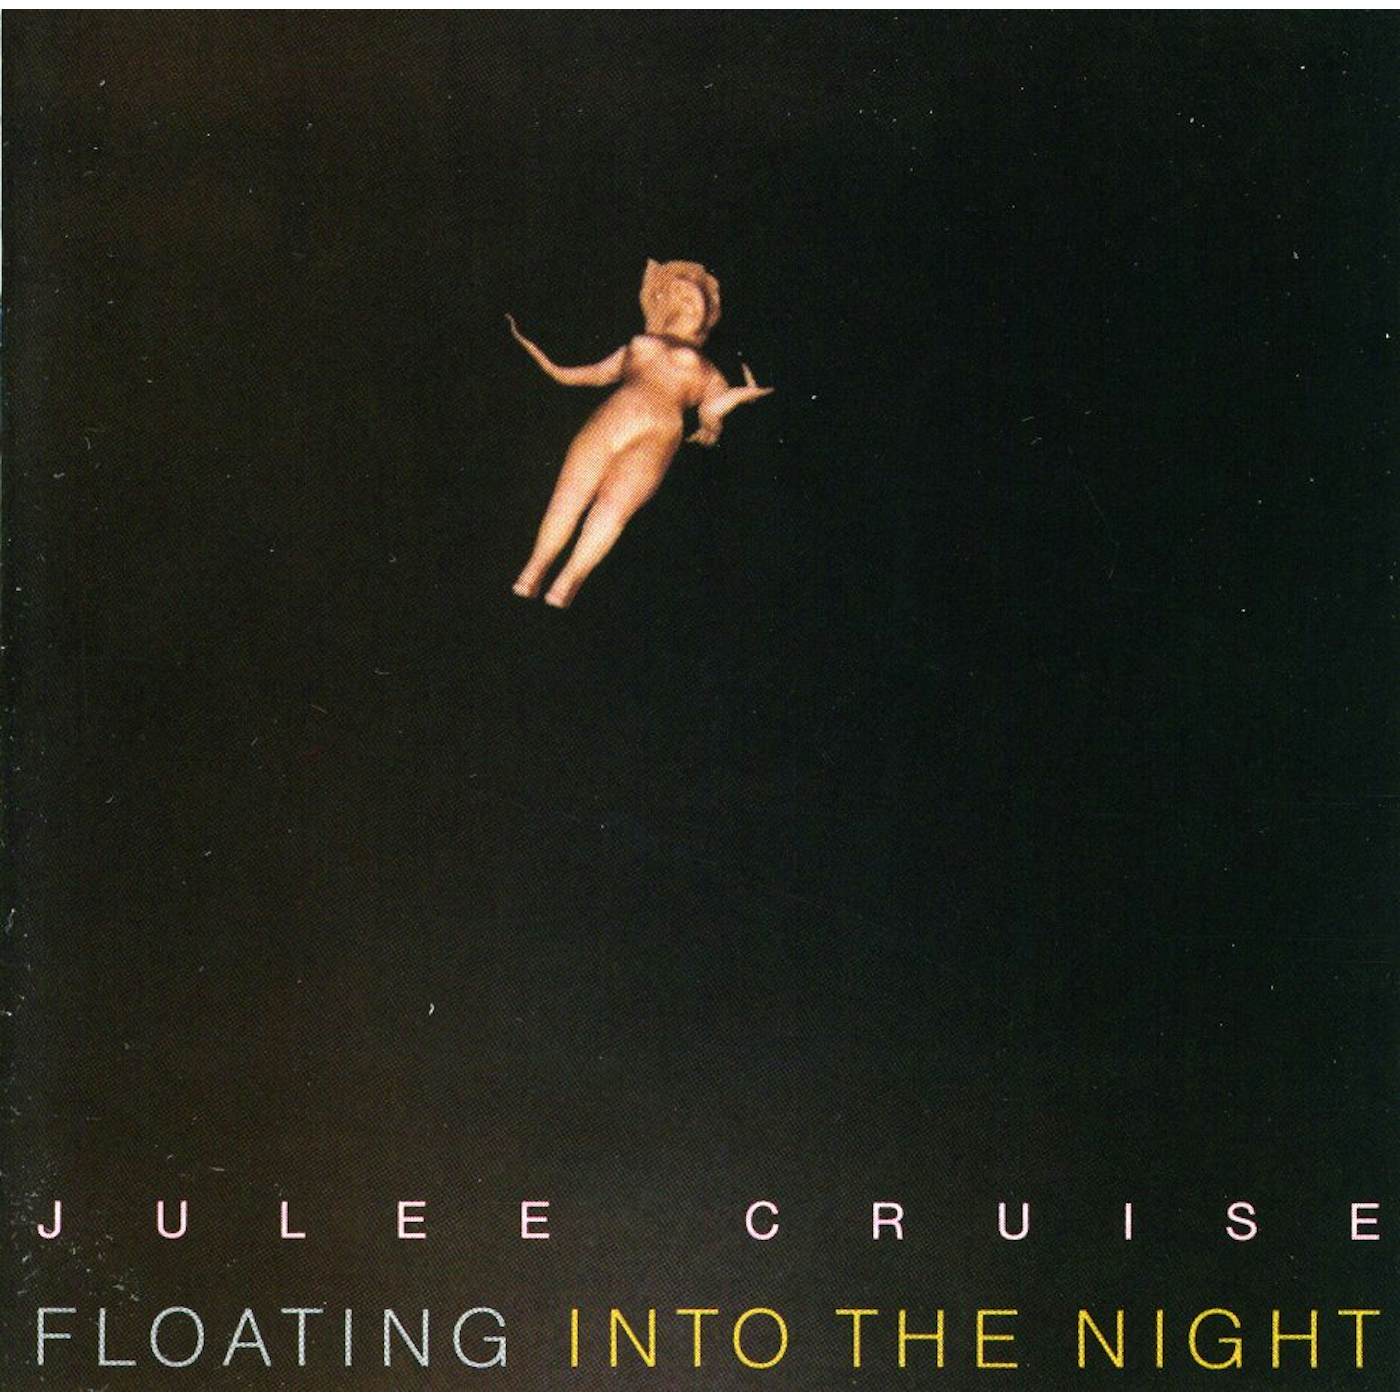 Julee Cruise FLOATING INTO THE NIGHT CD